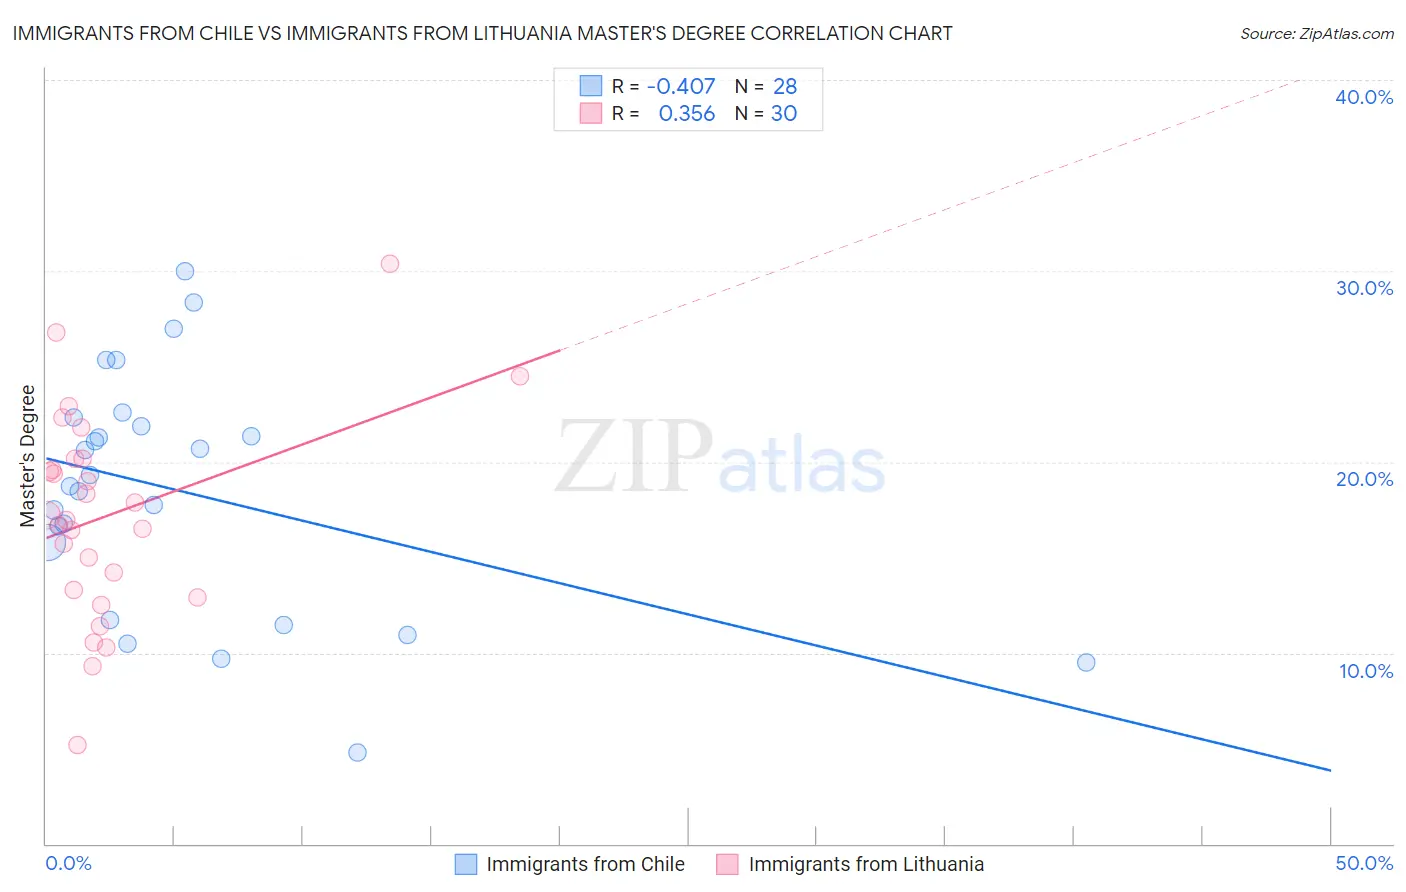 Immigrants from Chile vs Immigrants from Lithuania Master's Degree